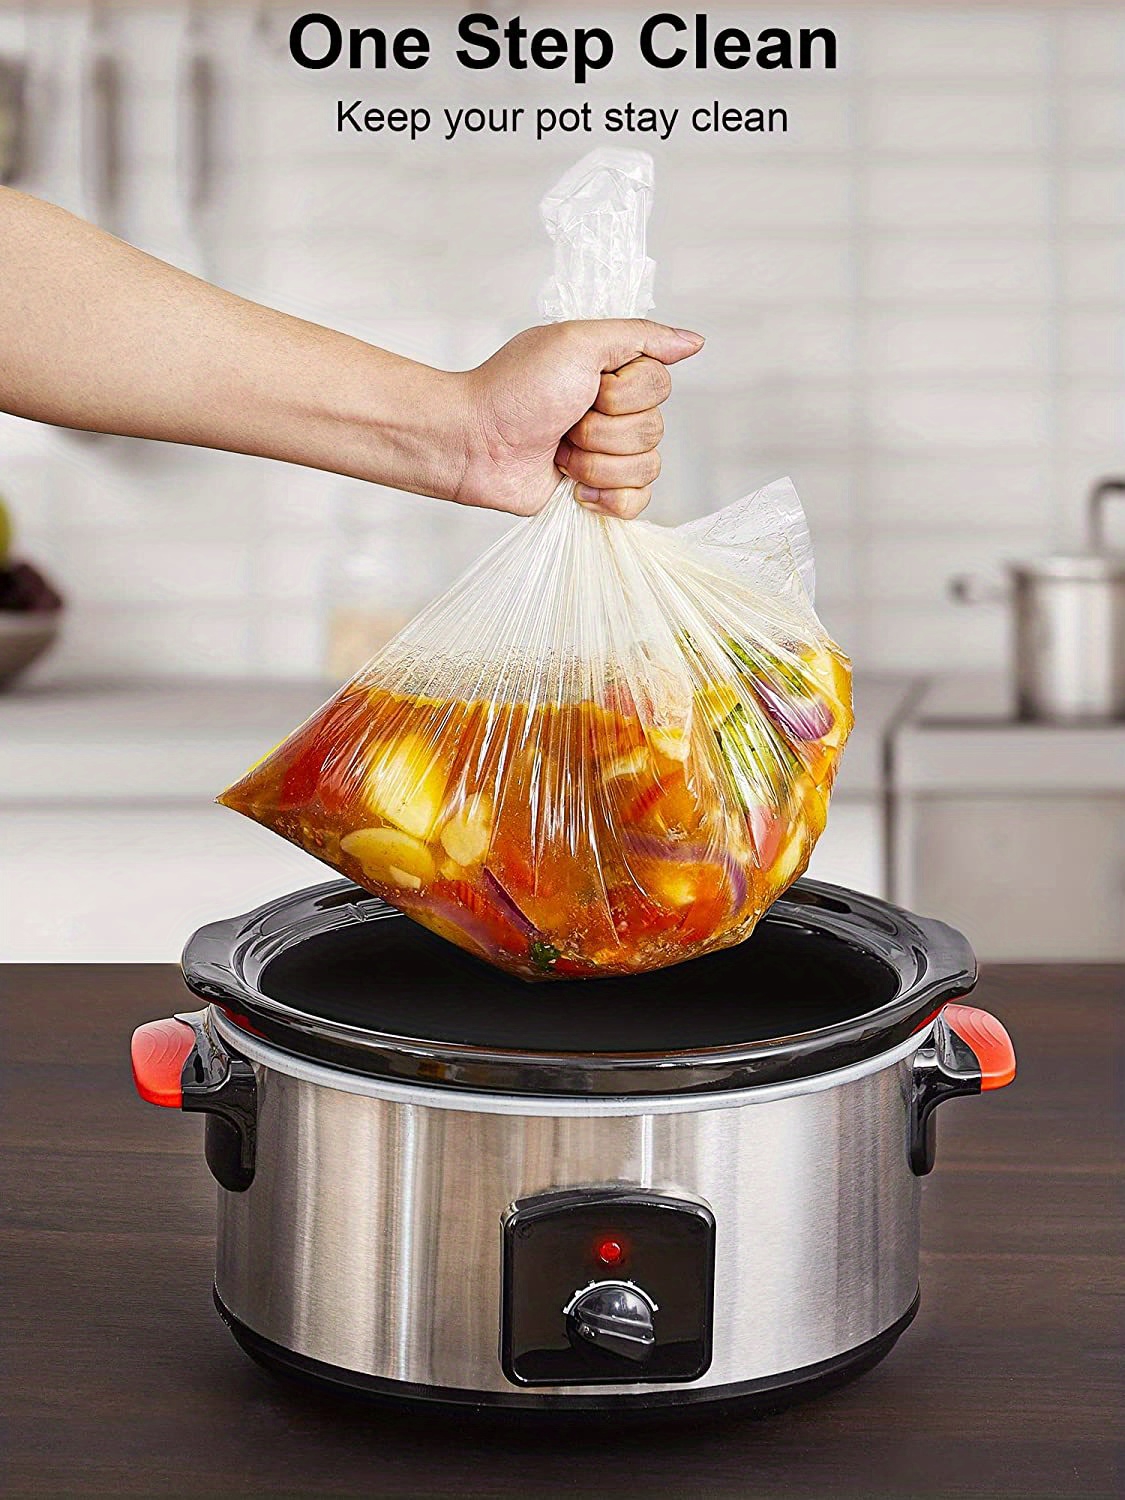 10pcs Slow Cooker Liners, Kitchen Disposable Cooking Bags, BPA Free, For  Oval Or Round Pot, Size 13*21 Inches, Fit 3QT To 8QT